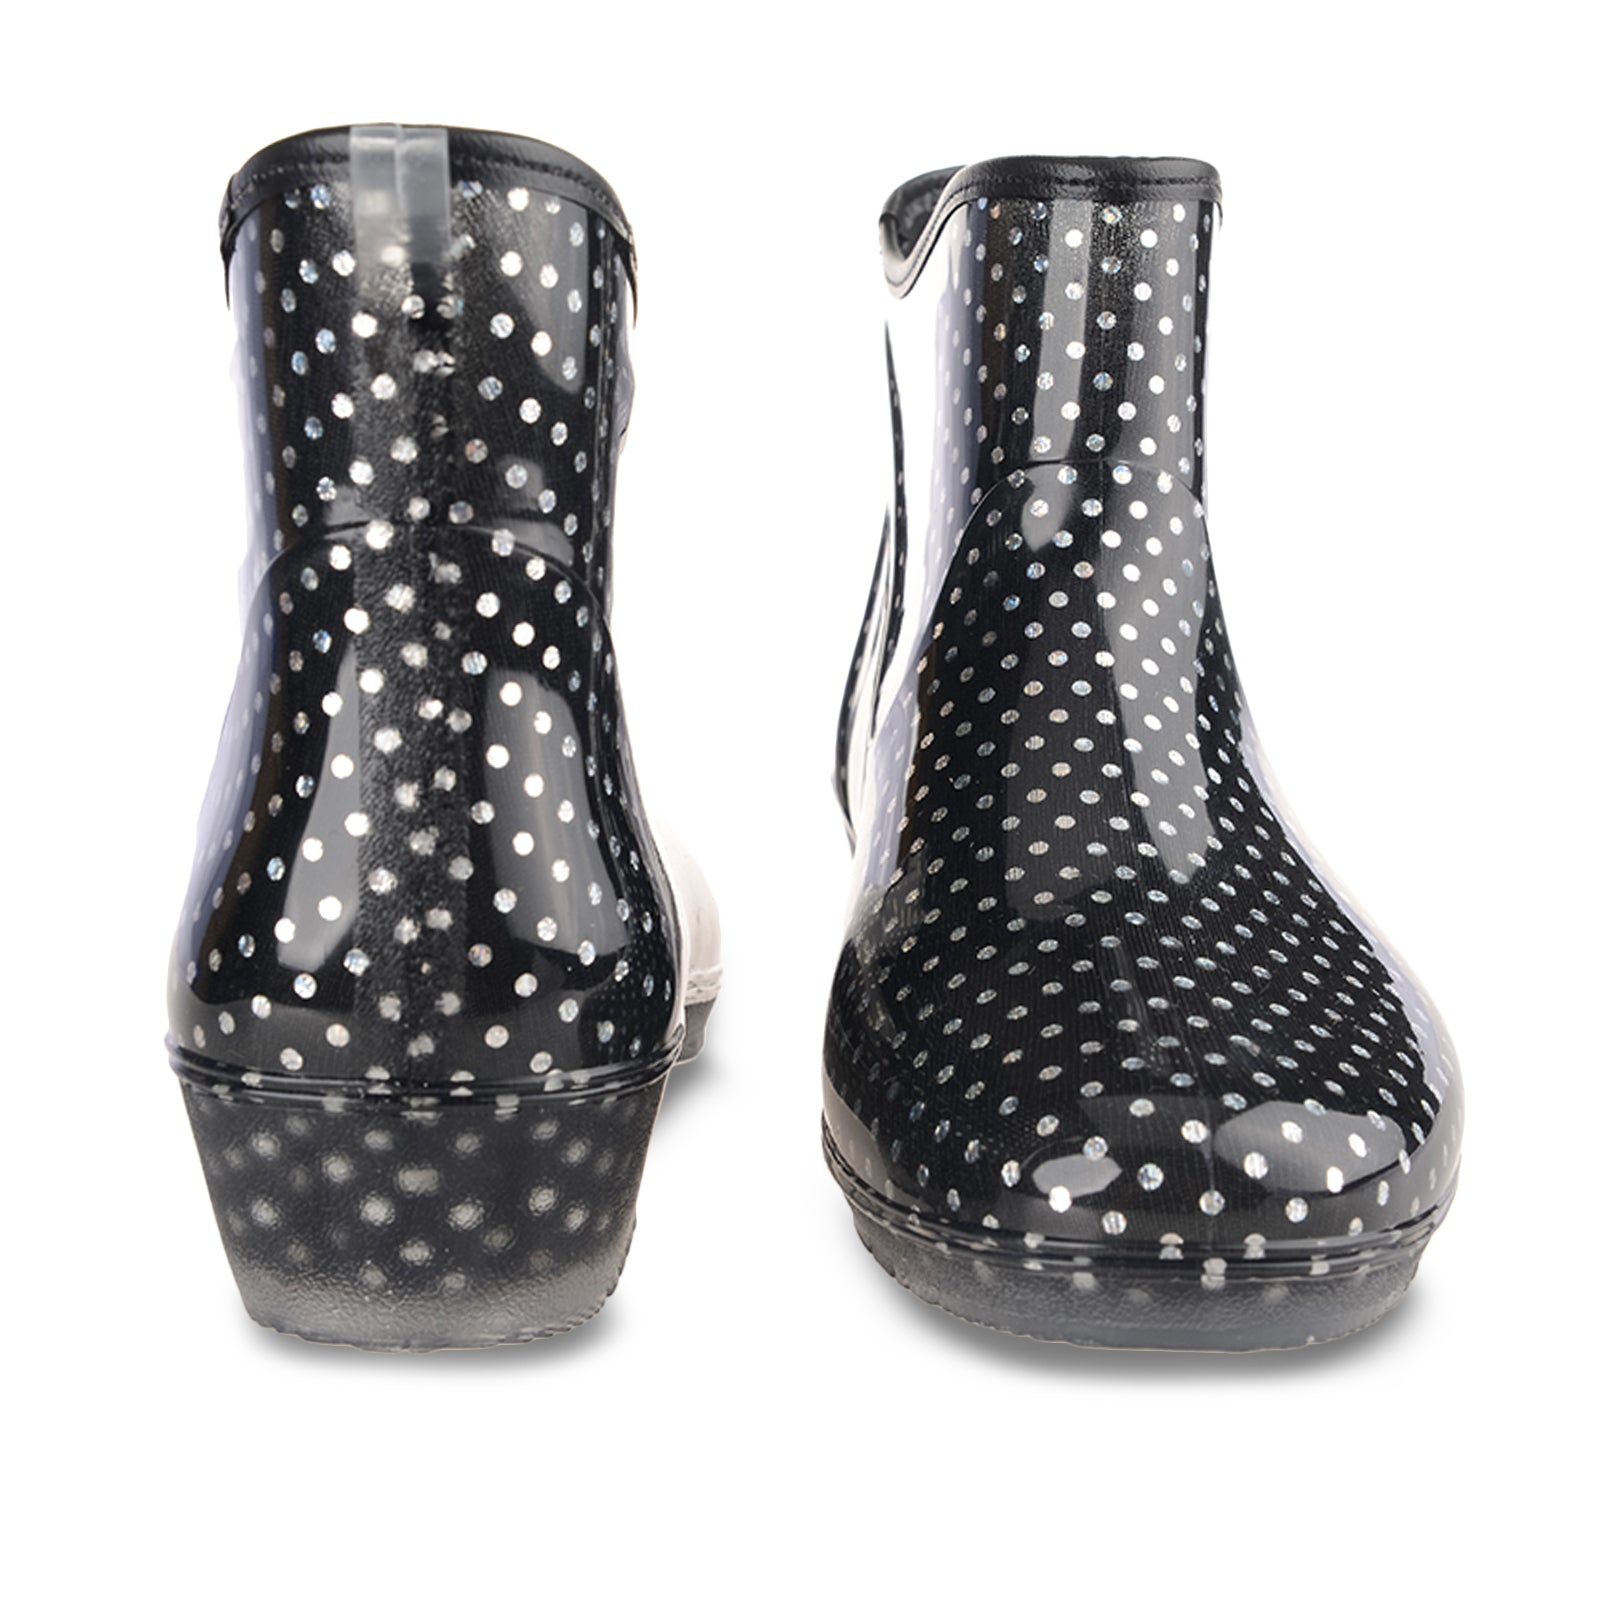 Pattern Classic Lady Rain Boots with Heels